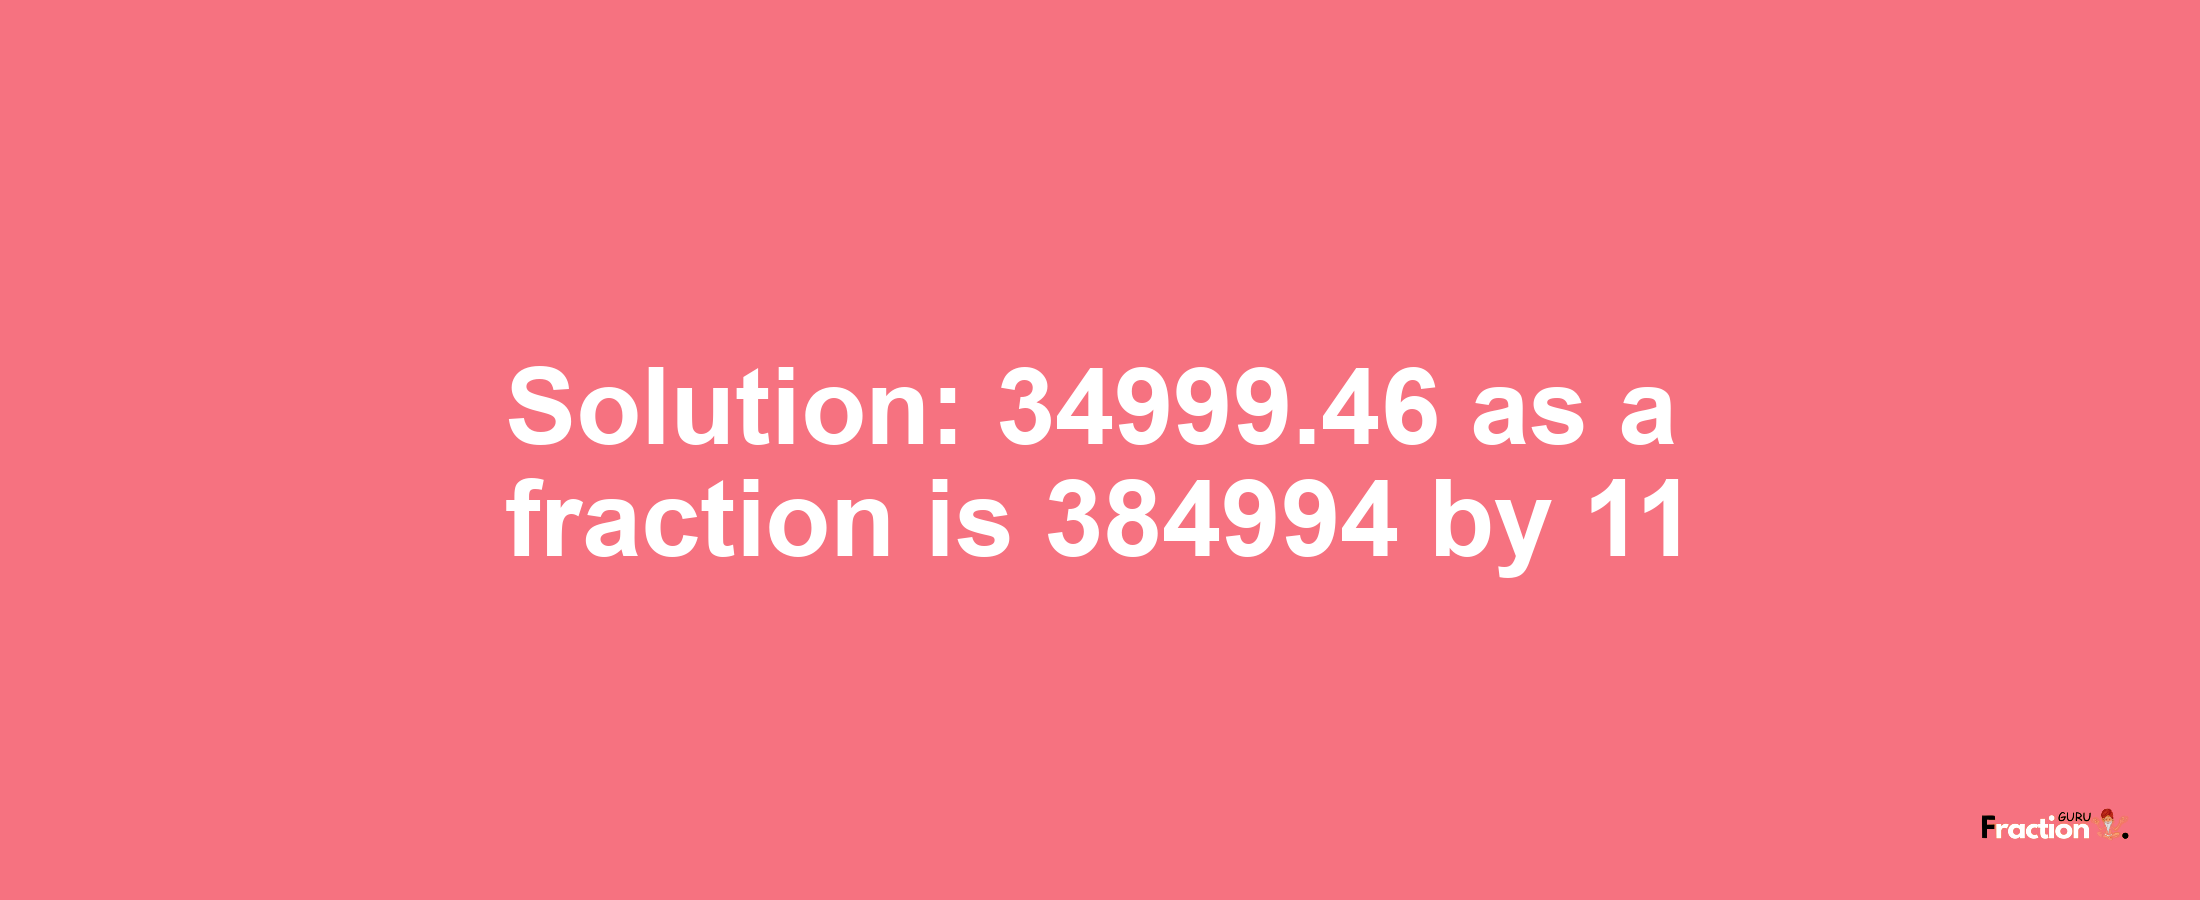 Solution:34999.46 as a fraction is 384994/11